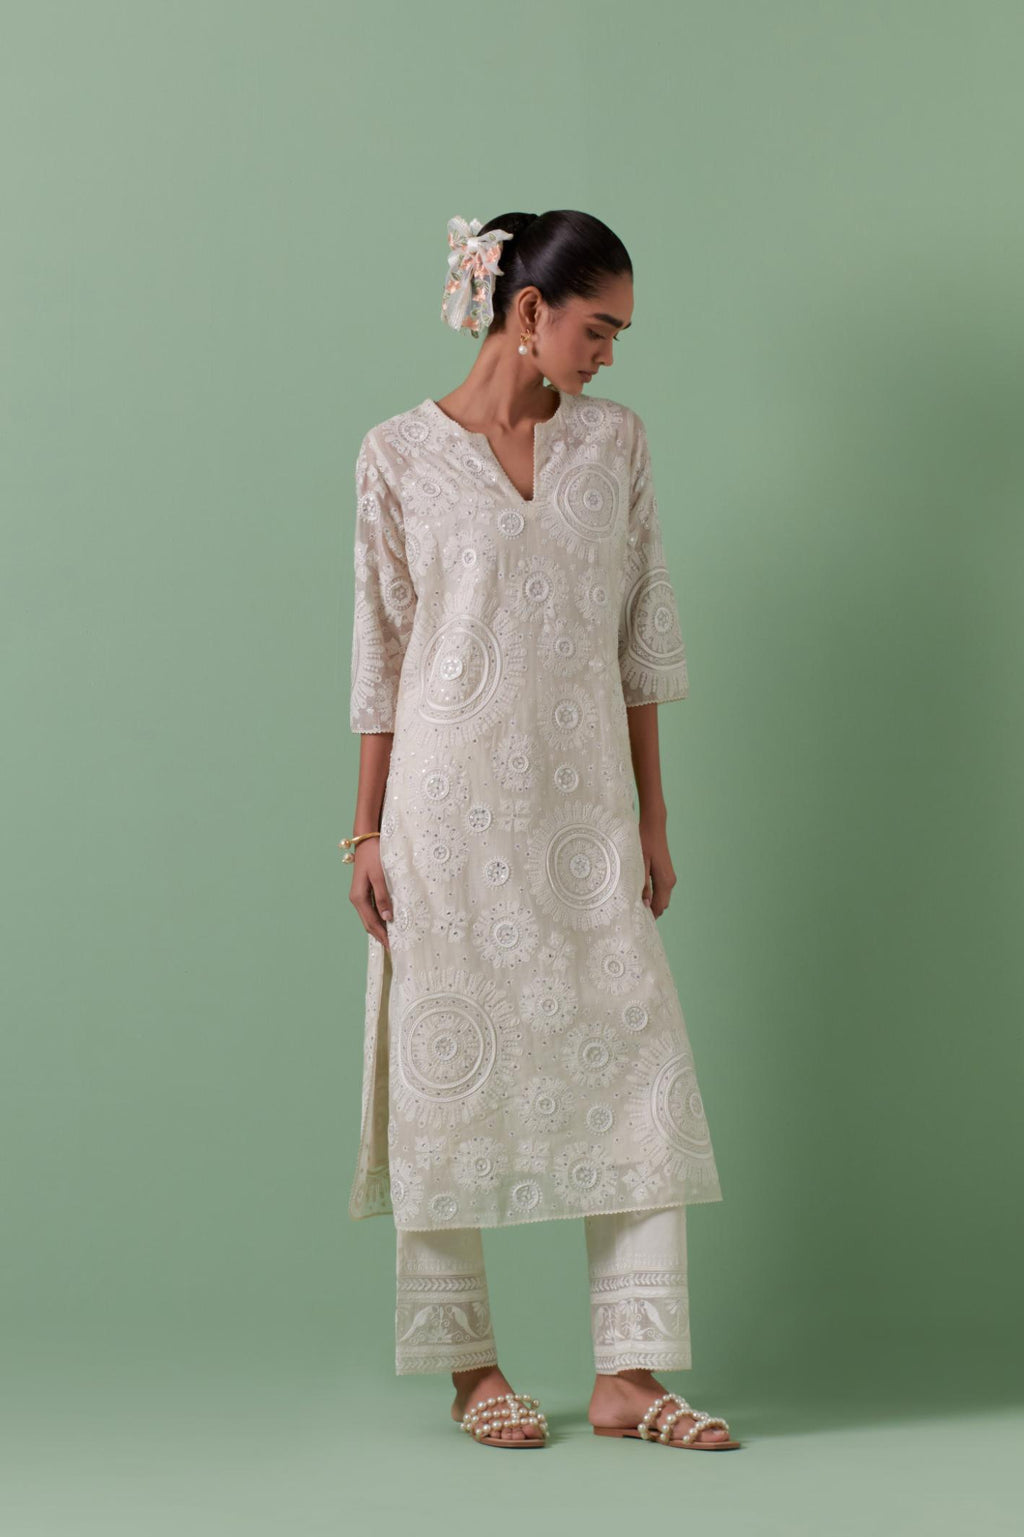 Off-white cotton chanderi straight kurta set with all over patchwork, silk thread, mirror, tassels embroidery and sequins.